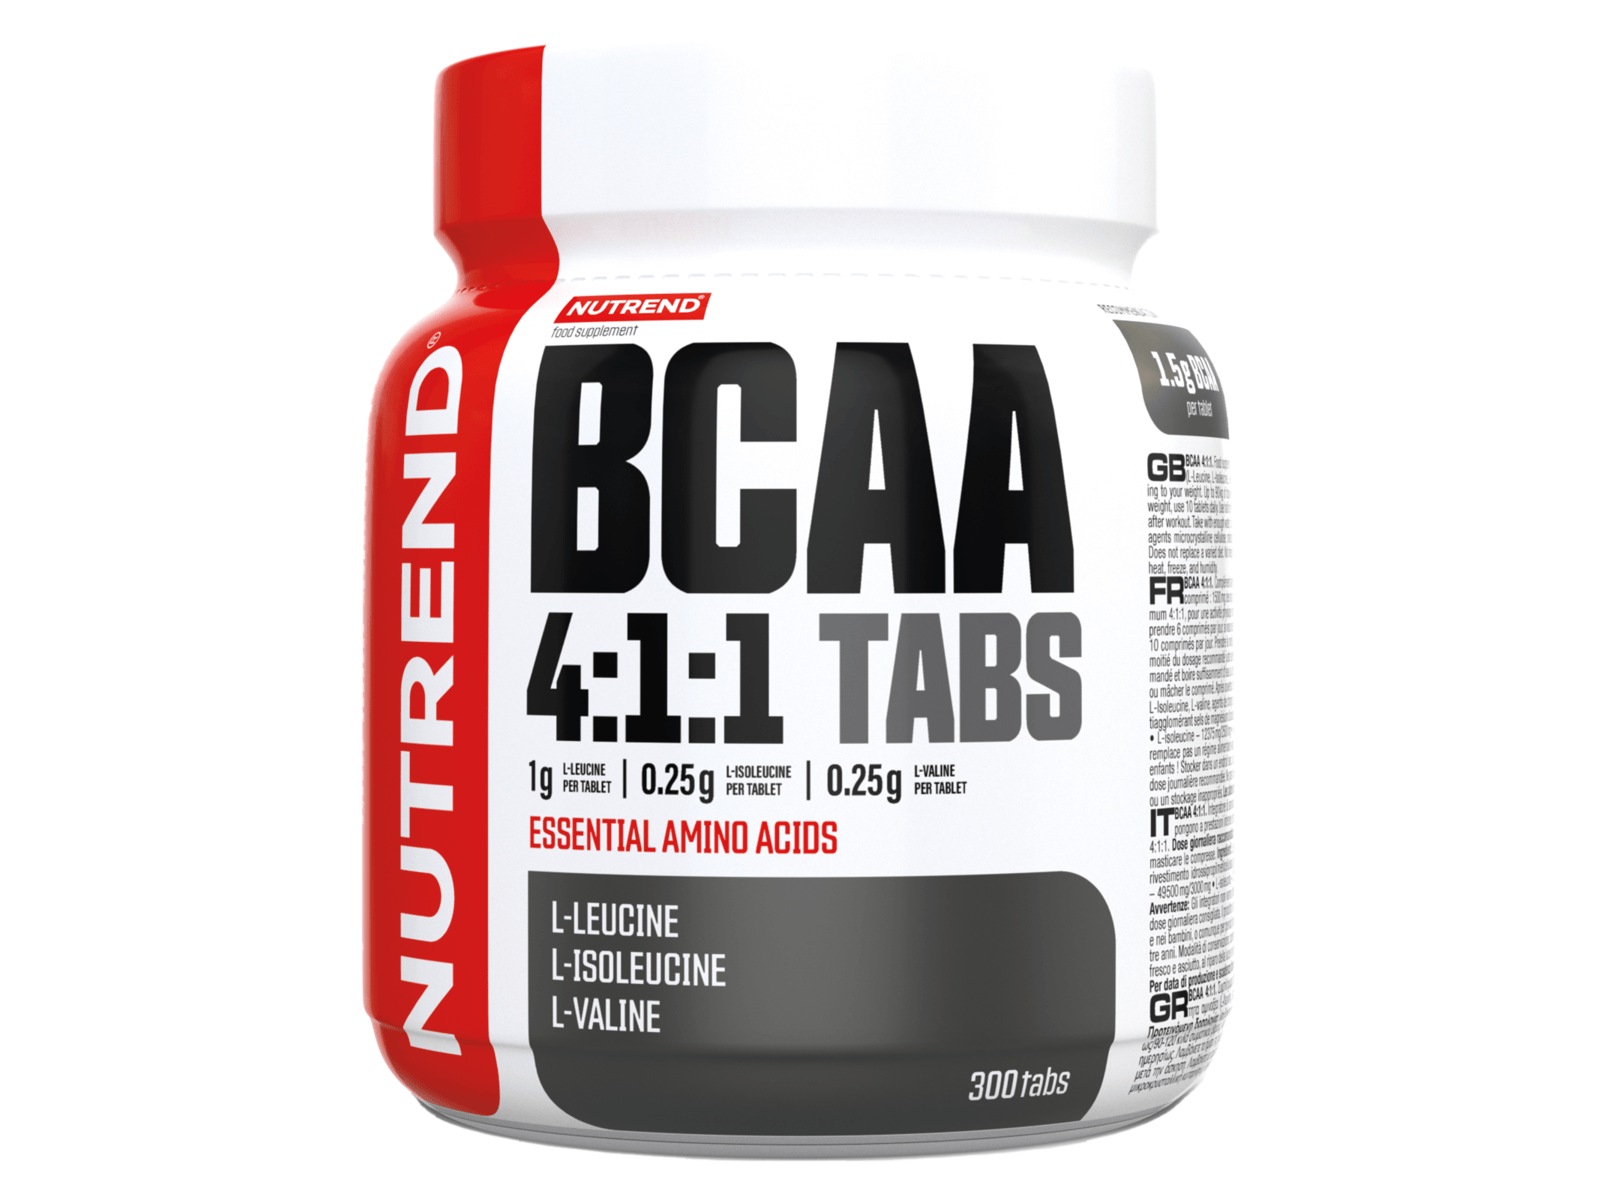 Nutrend - BCAA 4:1:1 Tabs (300 tablets)